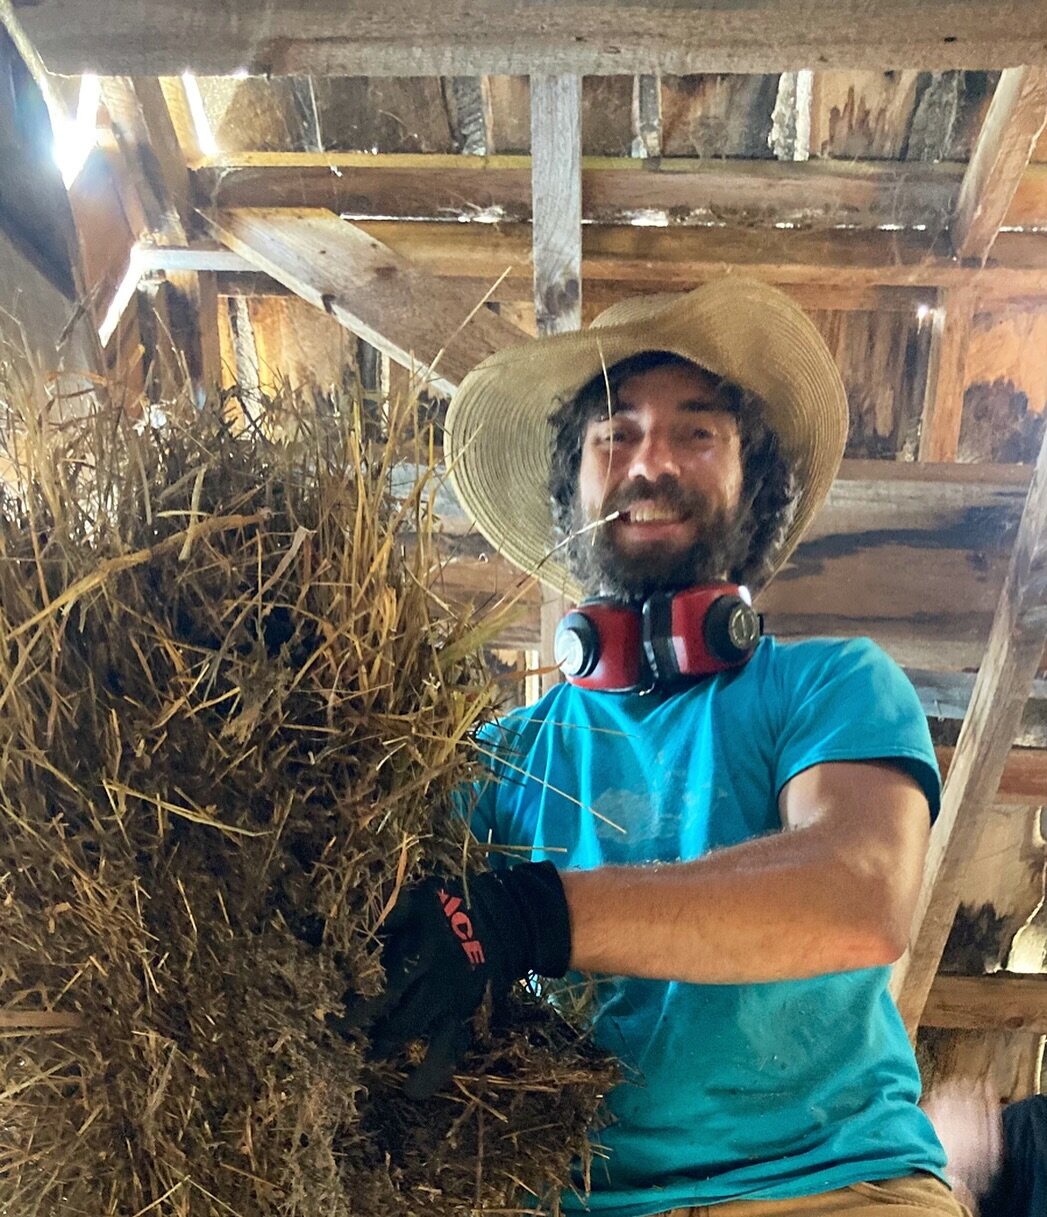 HAY! Happy Saturday from Mel&rsquo;s hand built timber framed barn, at his Sawmill in Matchwood, just down the road from camp.
🐐🐓🐂
Mel is a deep well of knowledge if you&rsquo;re interested in timber framing, hand woodworking, logging, homesteadin